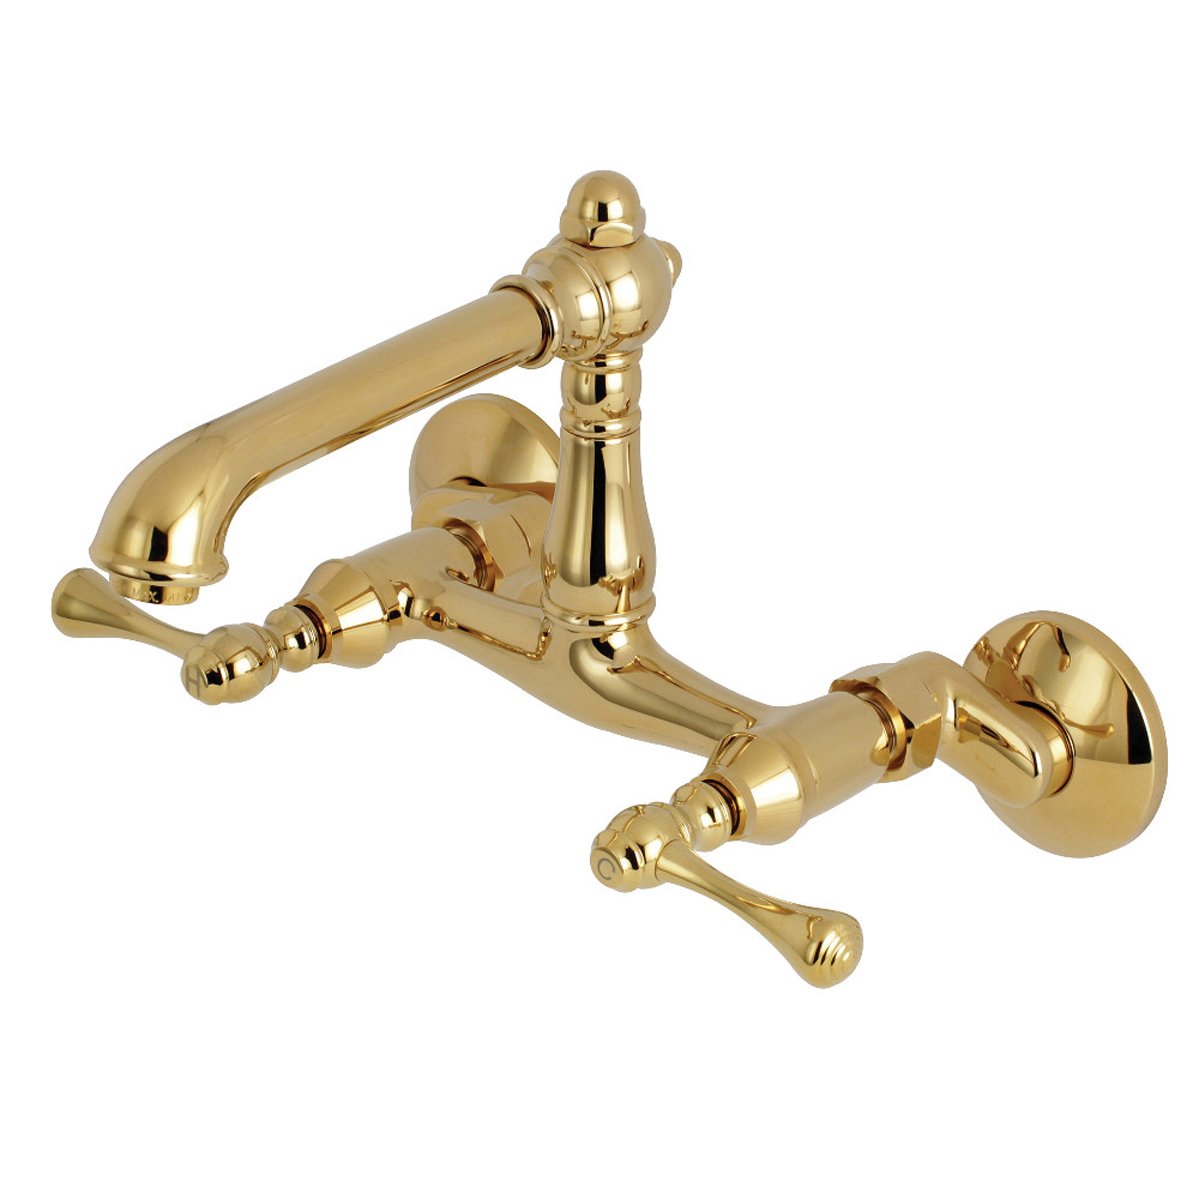 Kingston Brass English Country Wall Mount 6-Inch Adjustable Center Kitchen Faucet